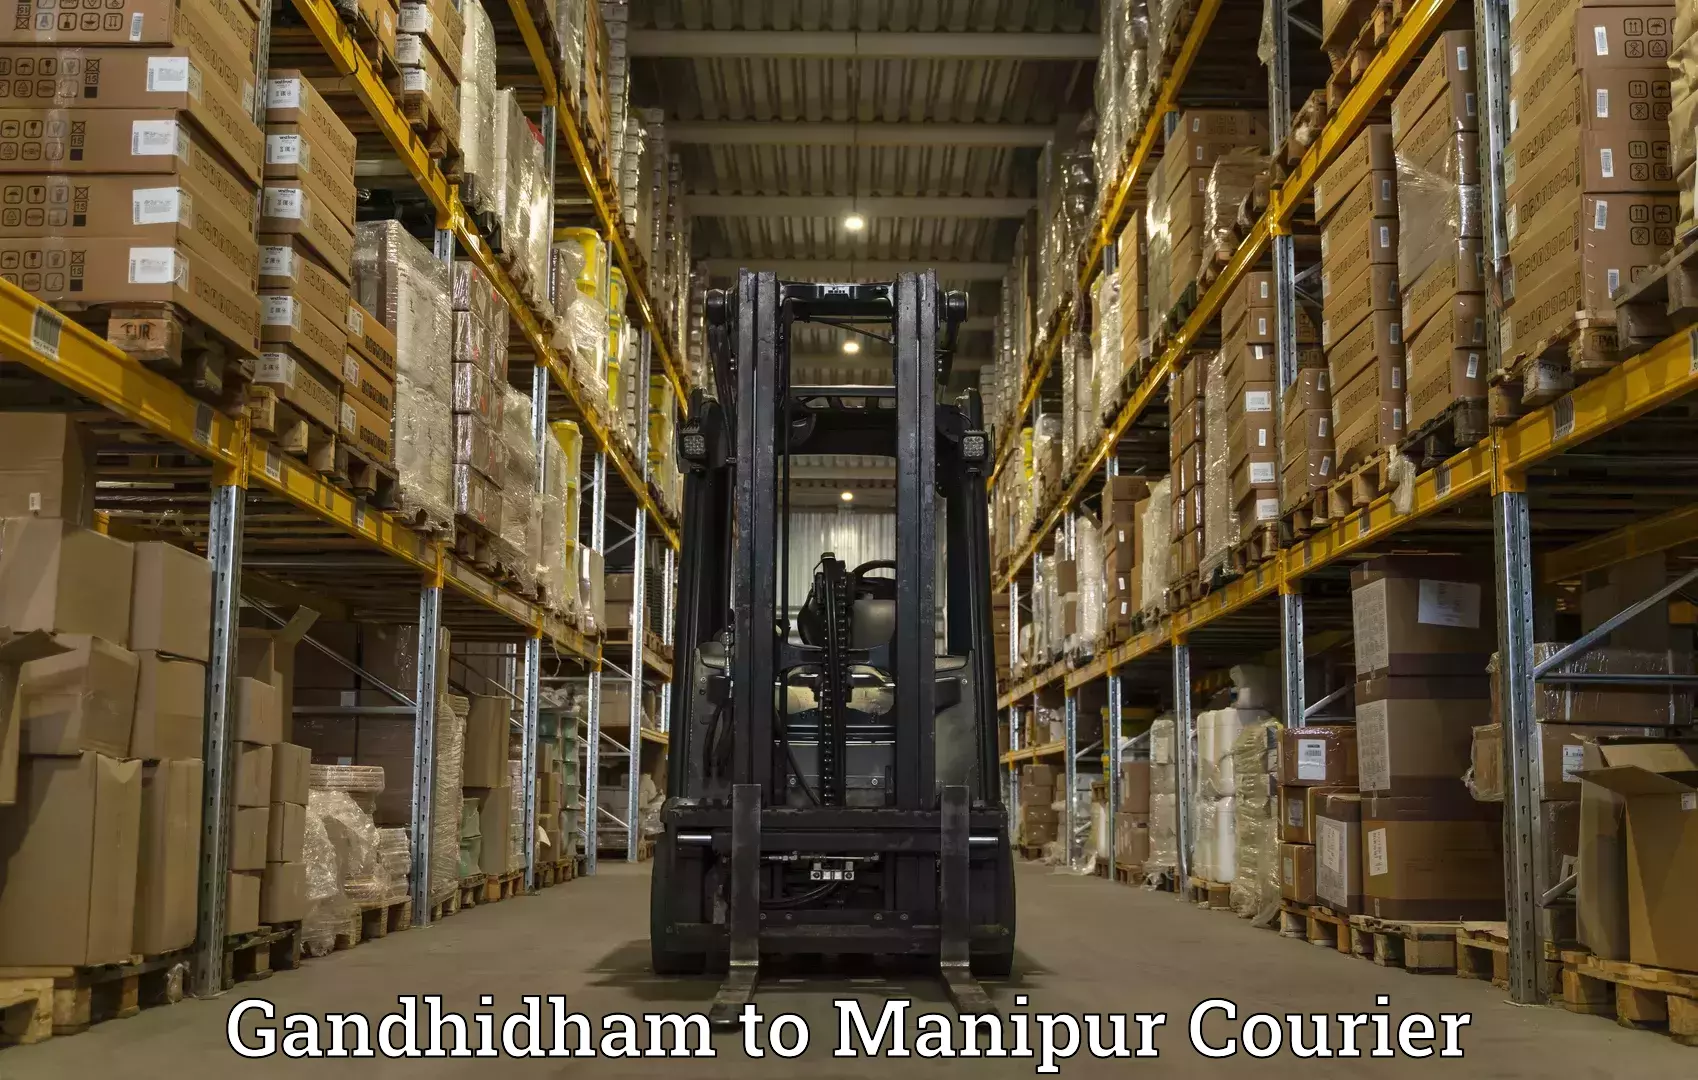 On-call courier service Gandhidham to Kanti